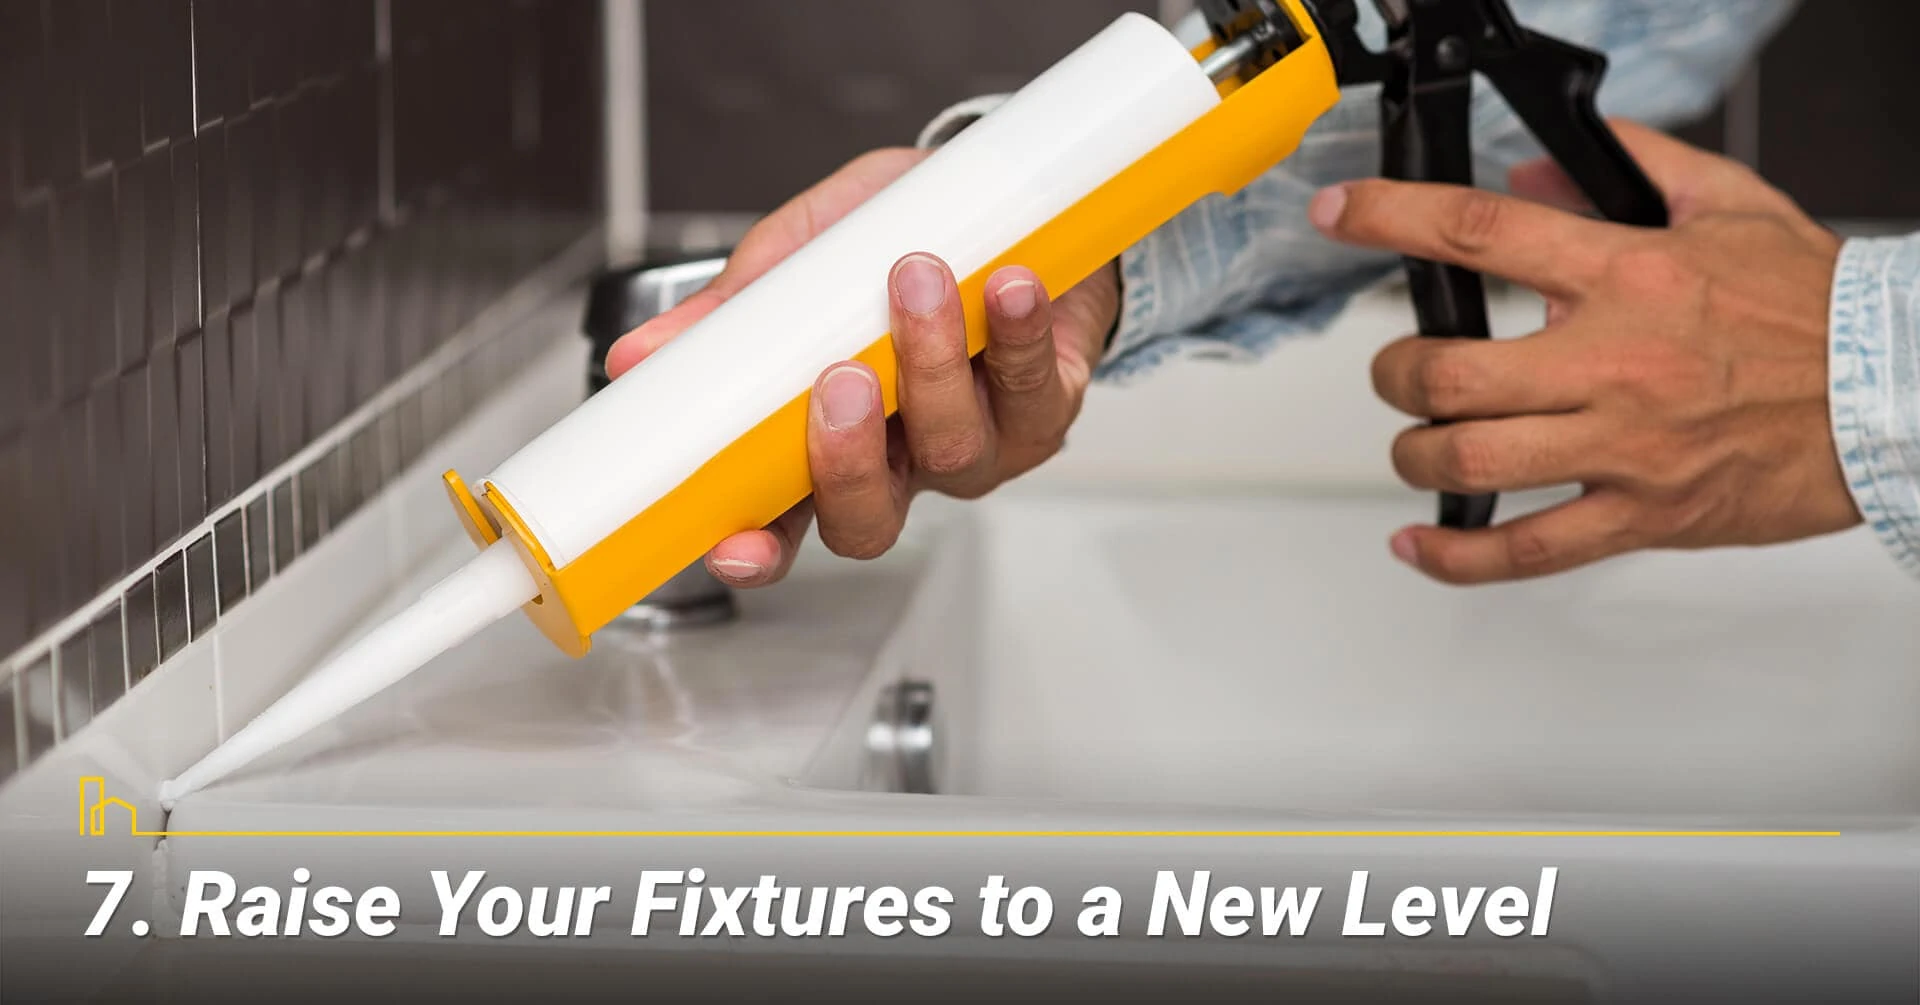 Raise Your Fixtures to a New Level, upgrade your fixtures